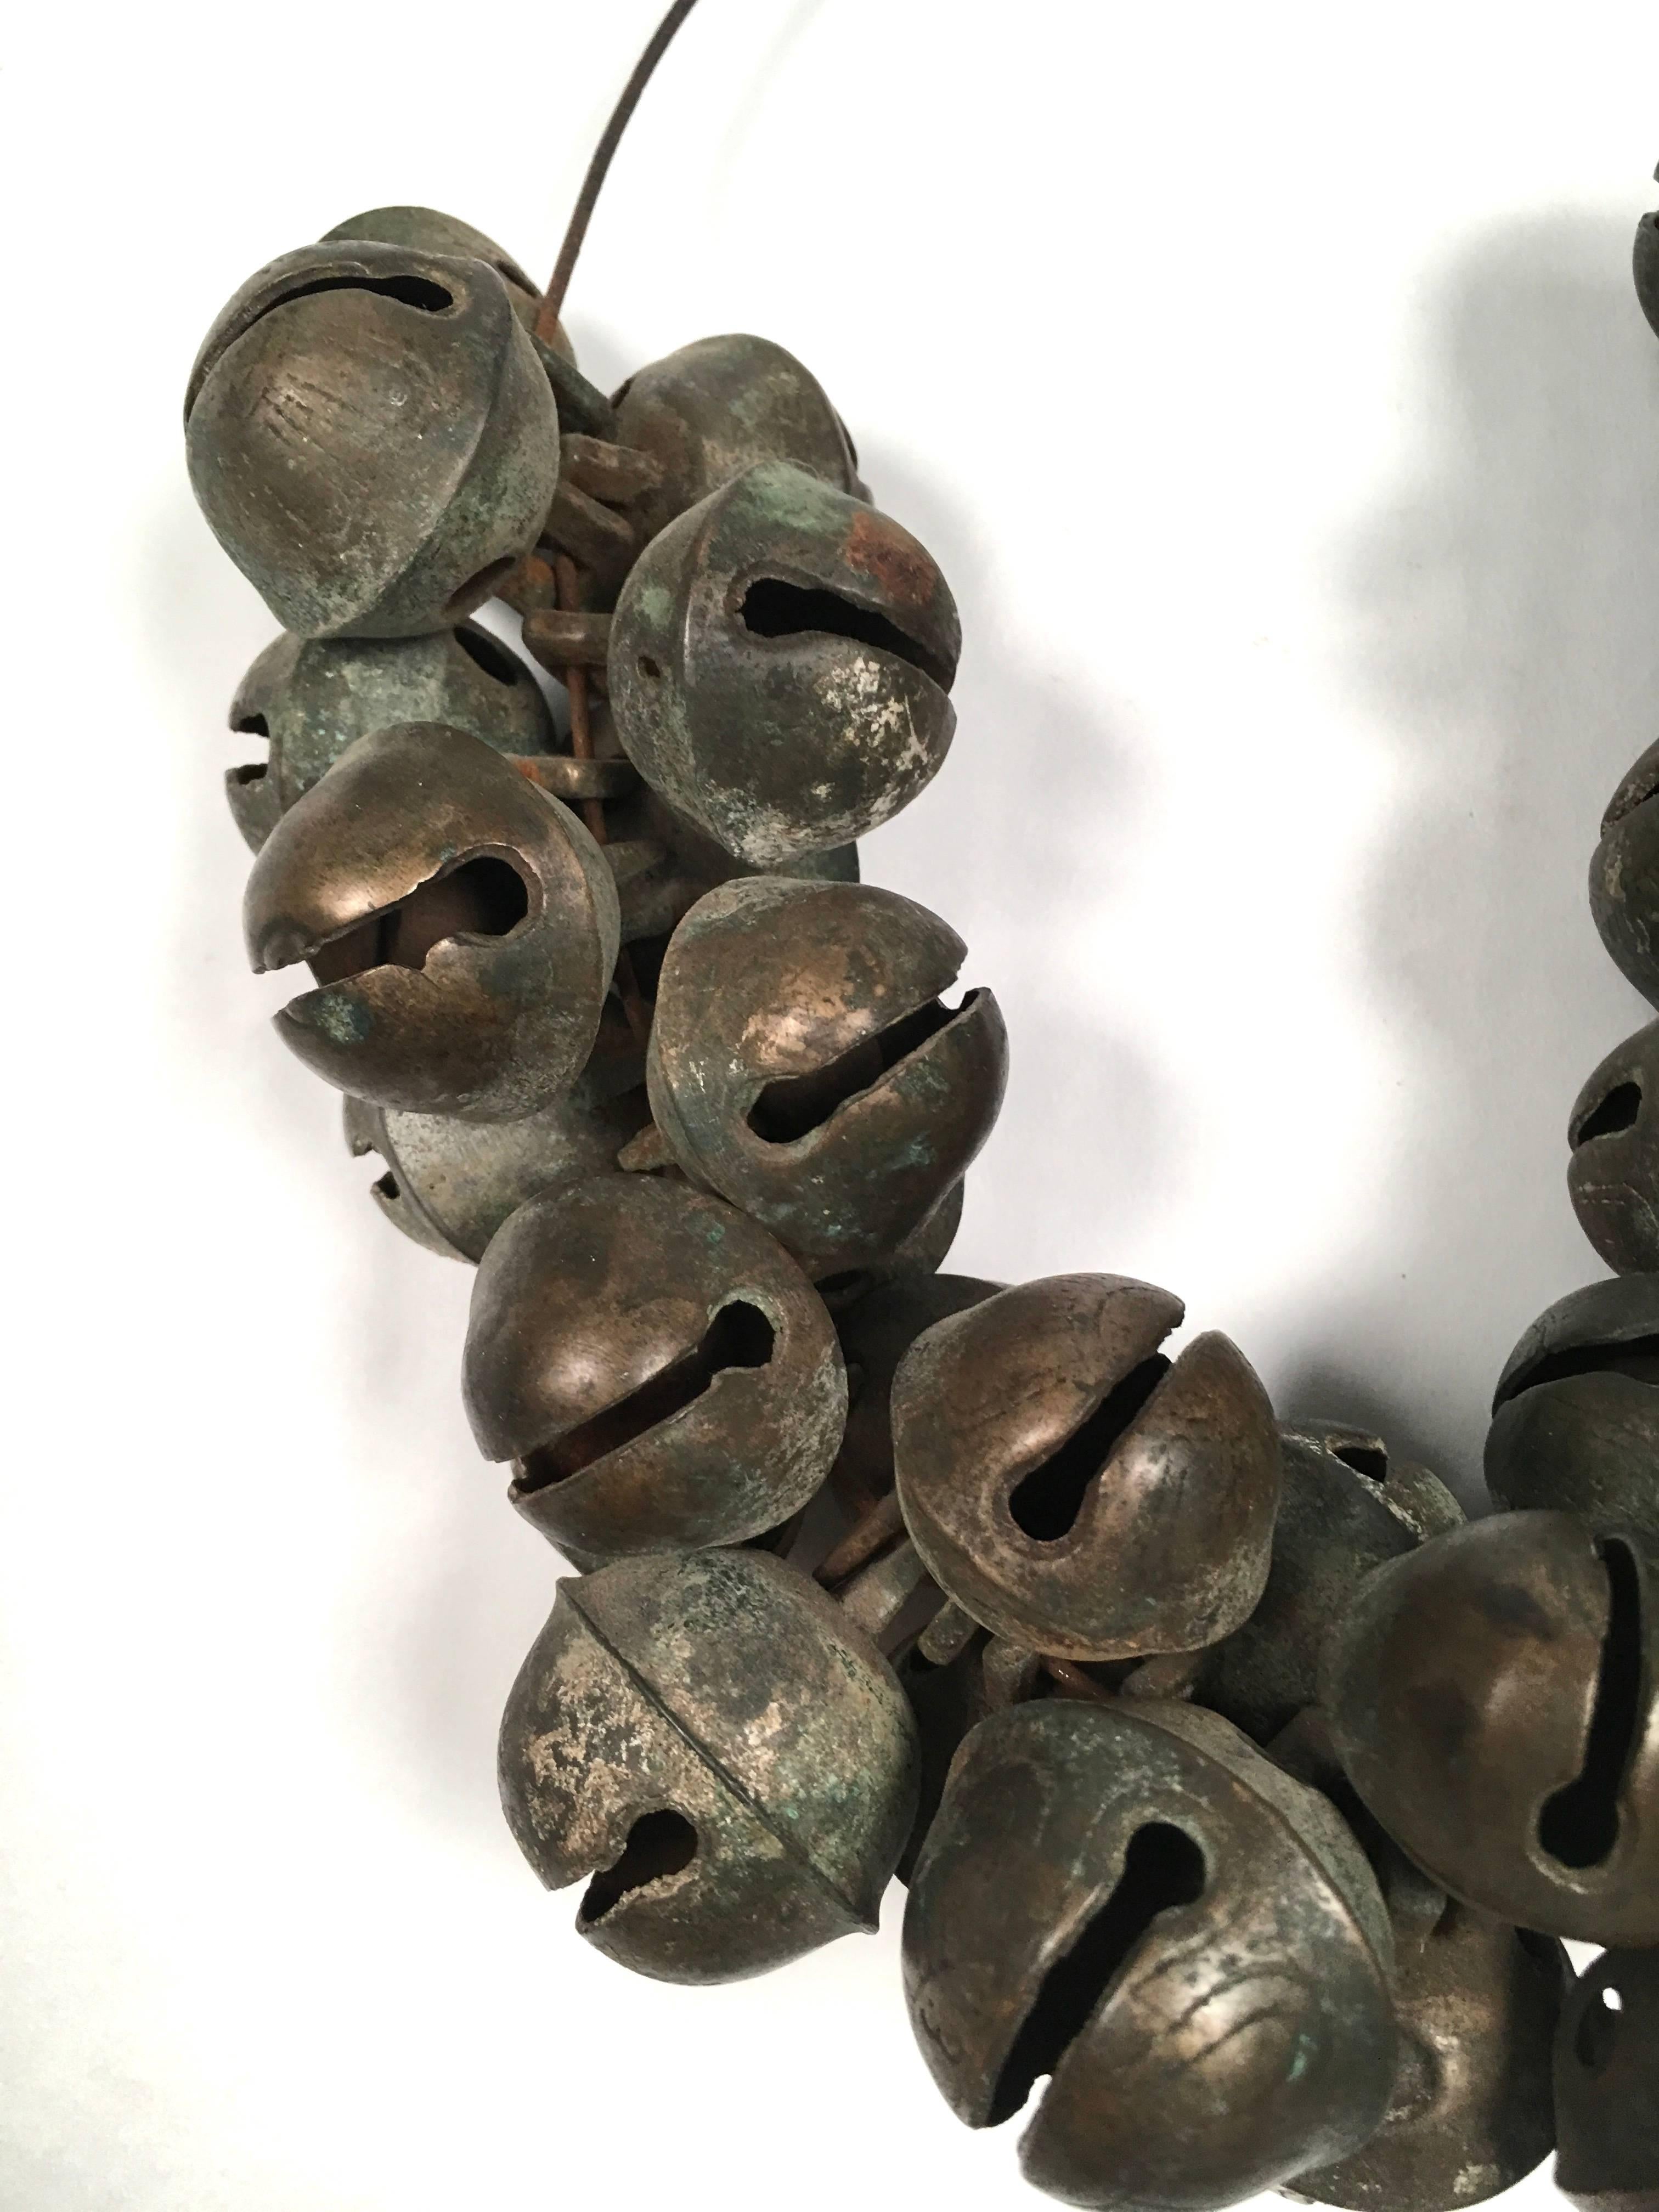 A large collection of 36 antique brass sleigh bells, which have a wonderful tone, in several sizes, engraved with a petal design and various numbers on a bent wire, as found. We wish we could attach a recording of the wonderful, perfect jingling